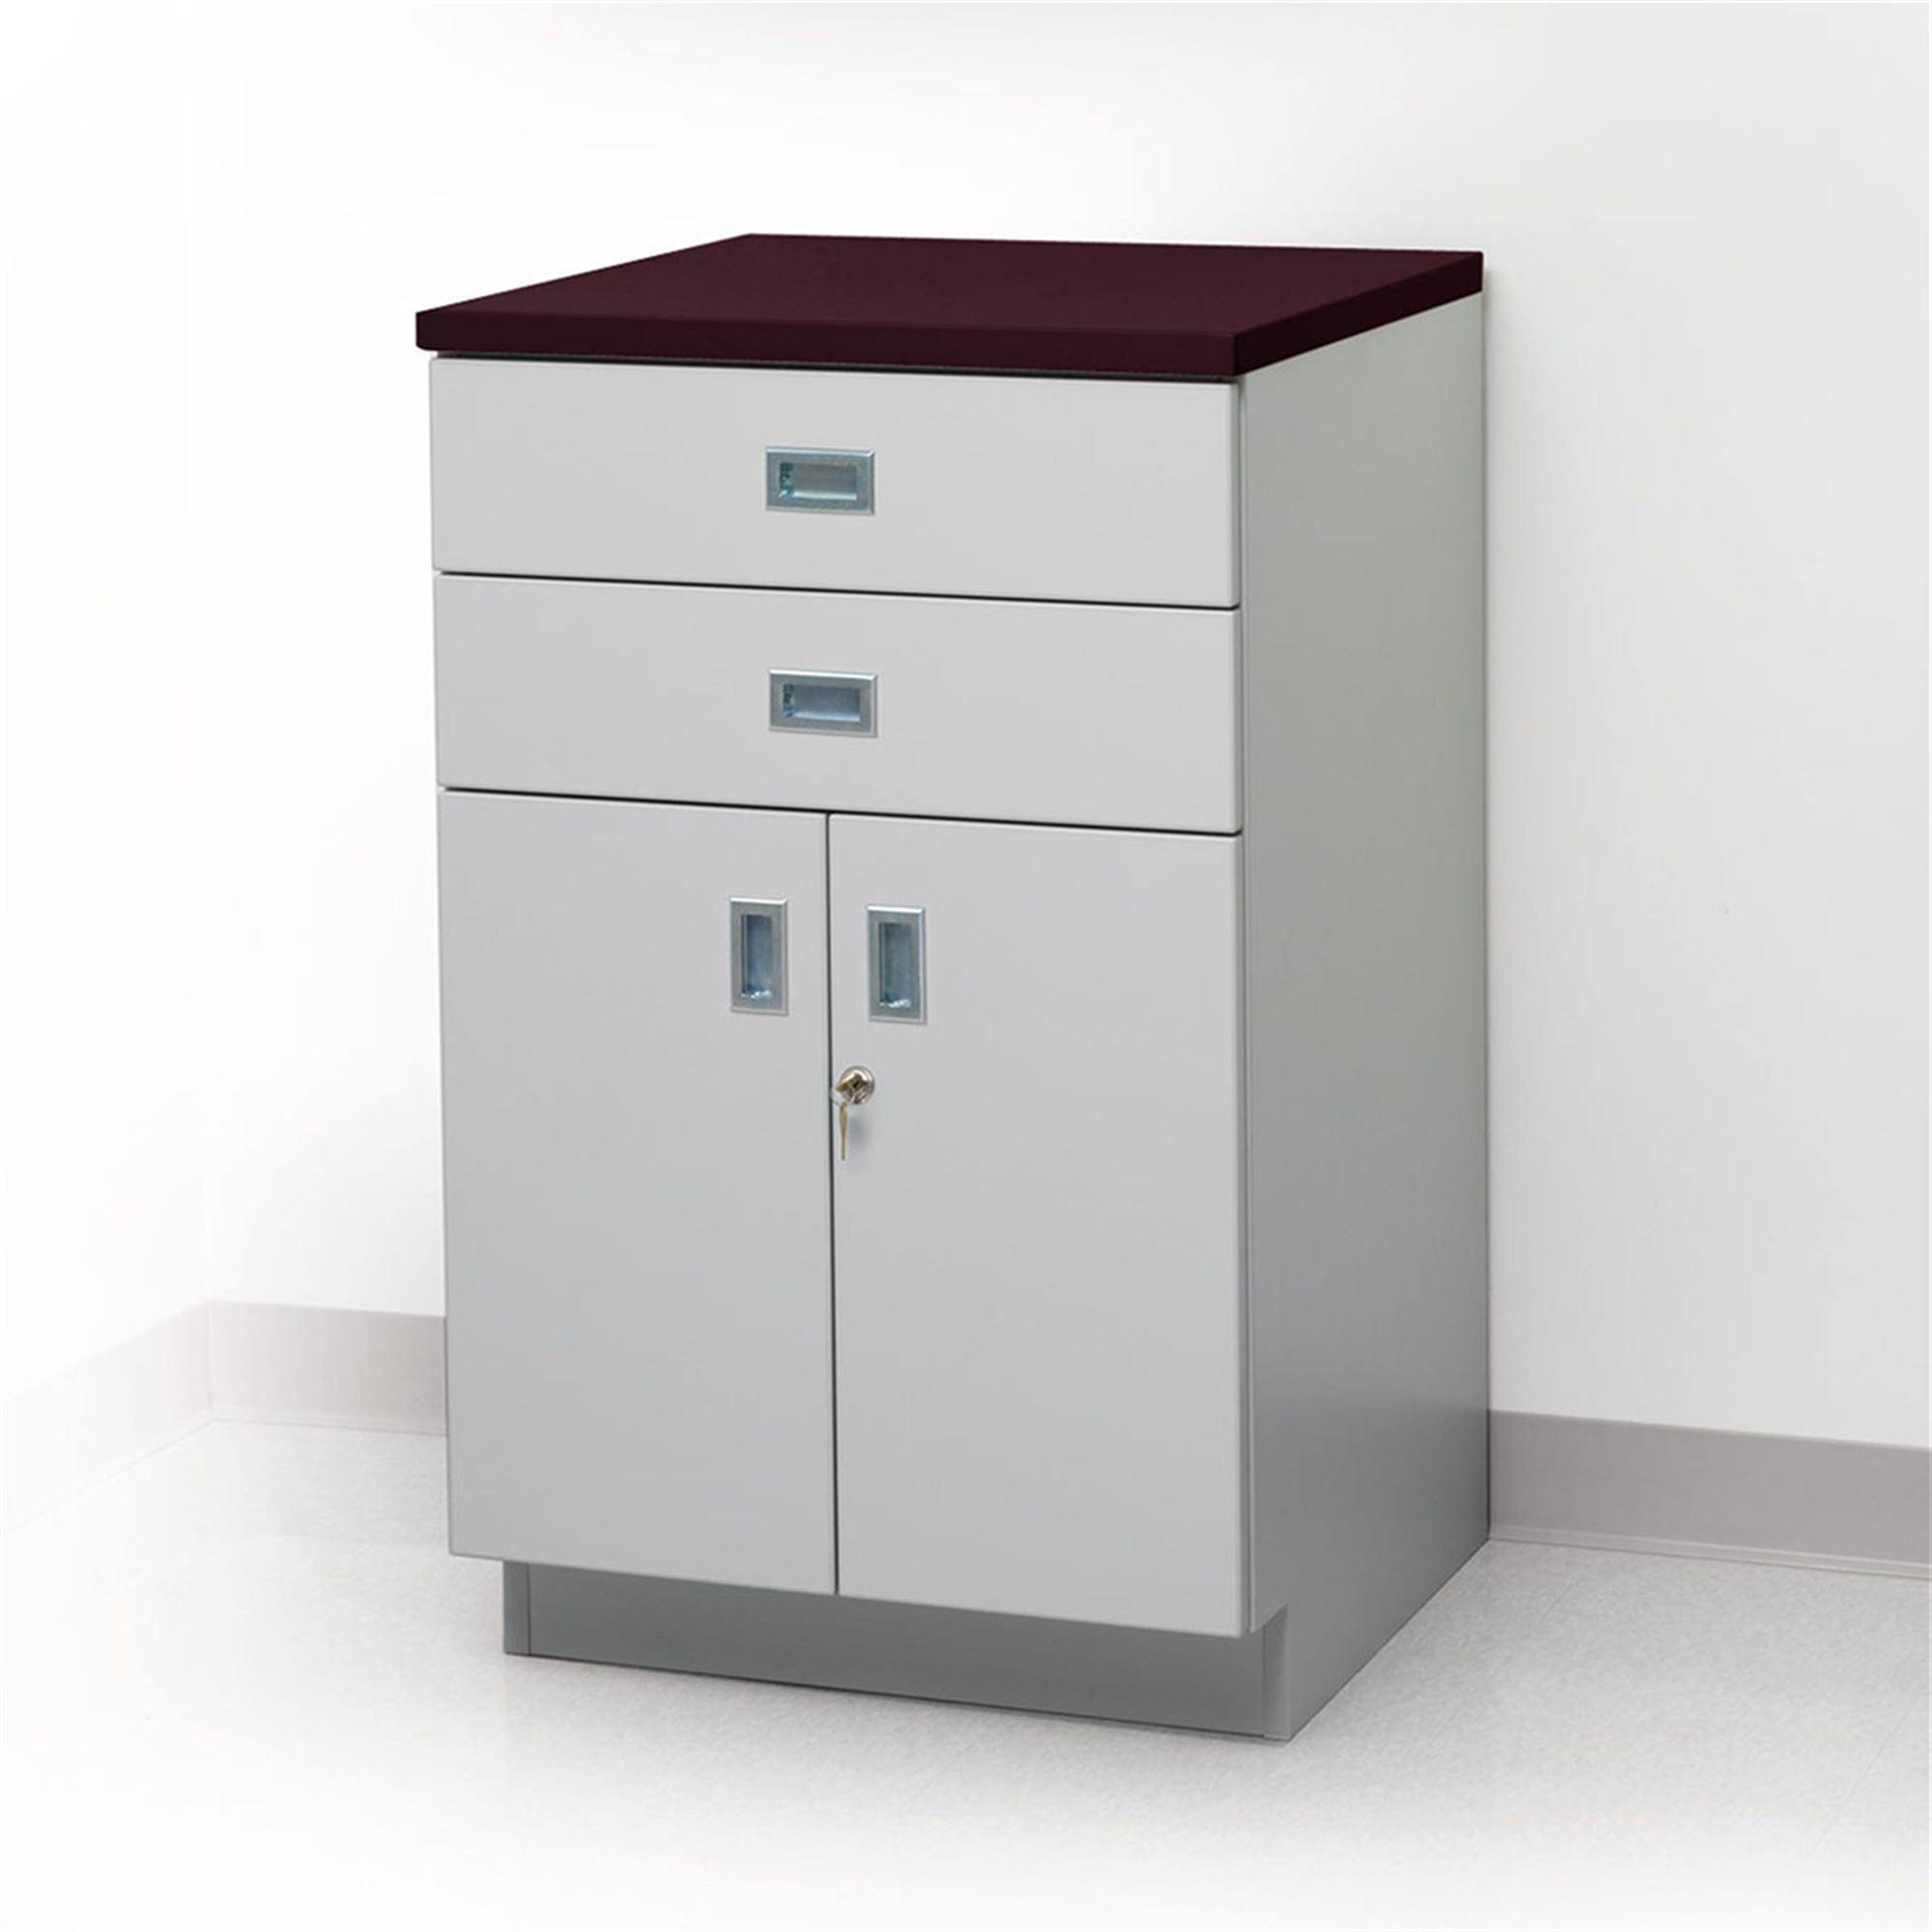 Premium Floor Cabinet - Two Drawers and One Shelf 2 Drawer, 1 Shelf ,1 Each - Axiom Medical Supplies